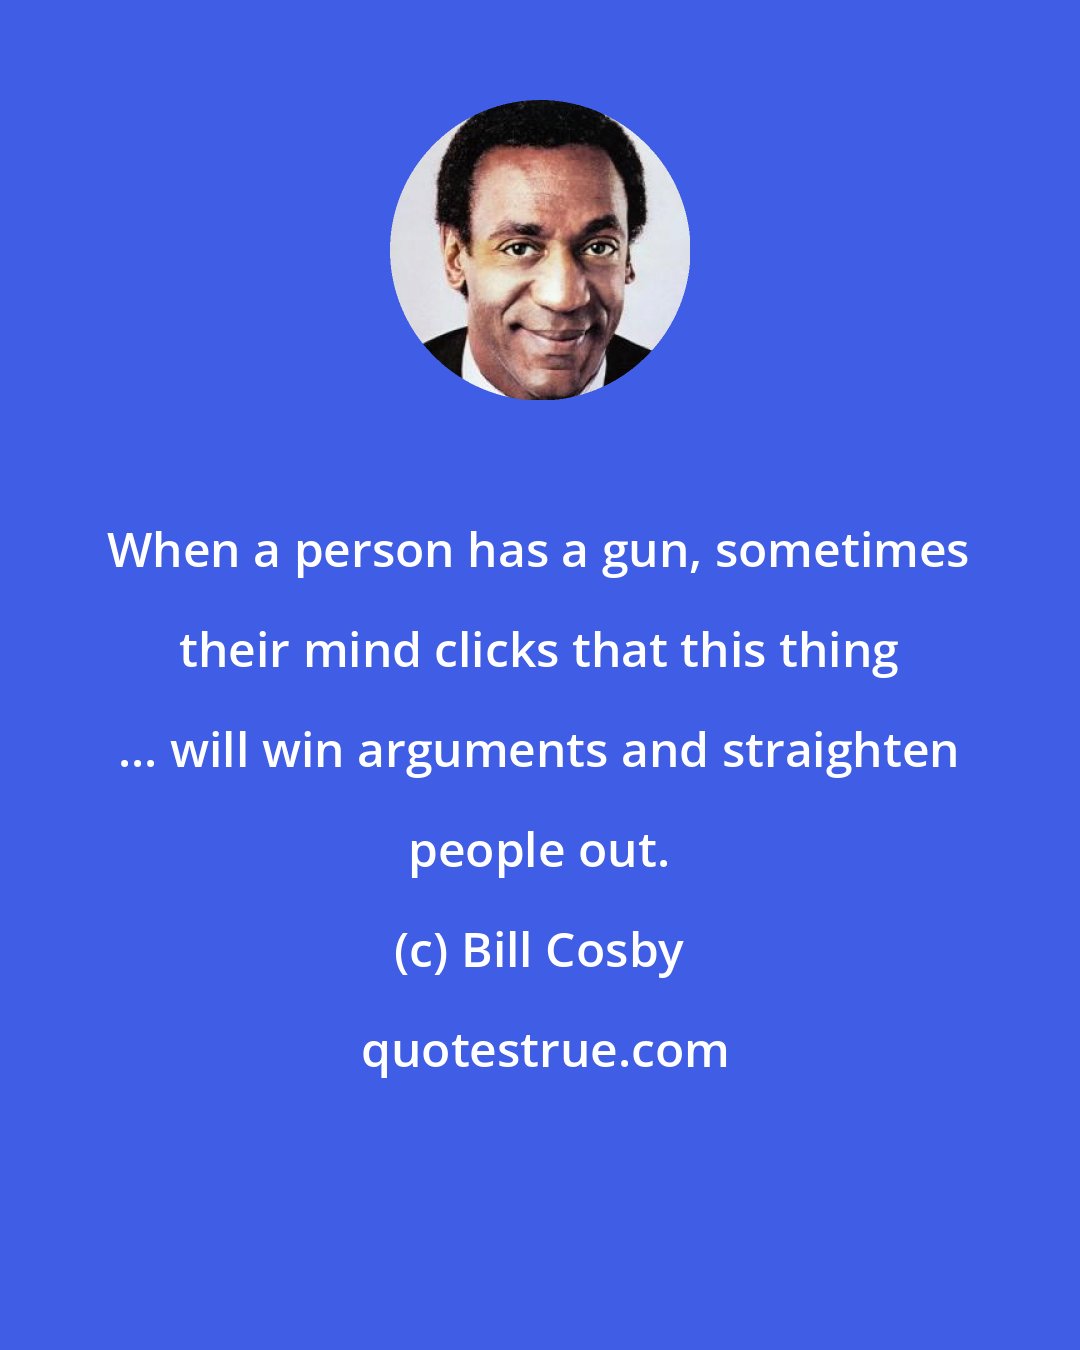 Bill Cosby: When a person has a gun, sometimes their mind clicks that this thing ... will win arguments and straighten people out.